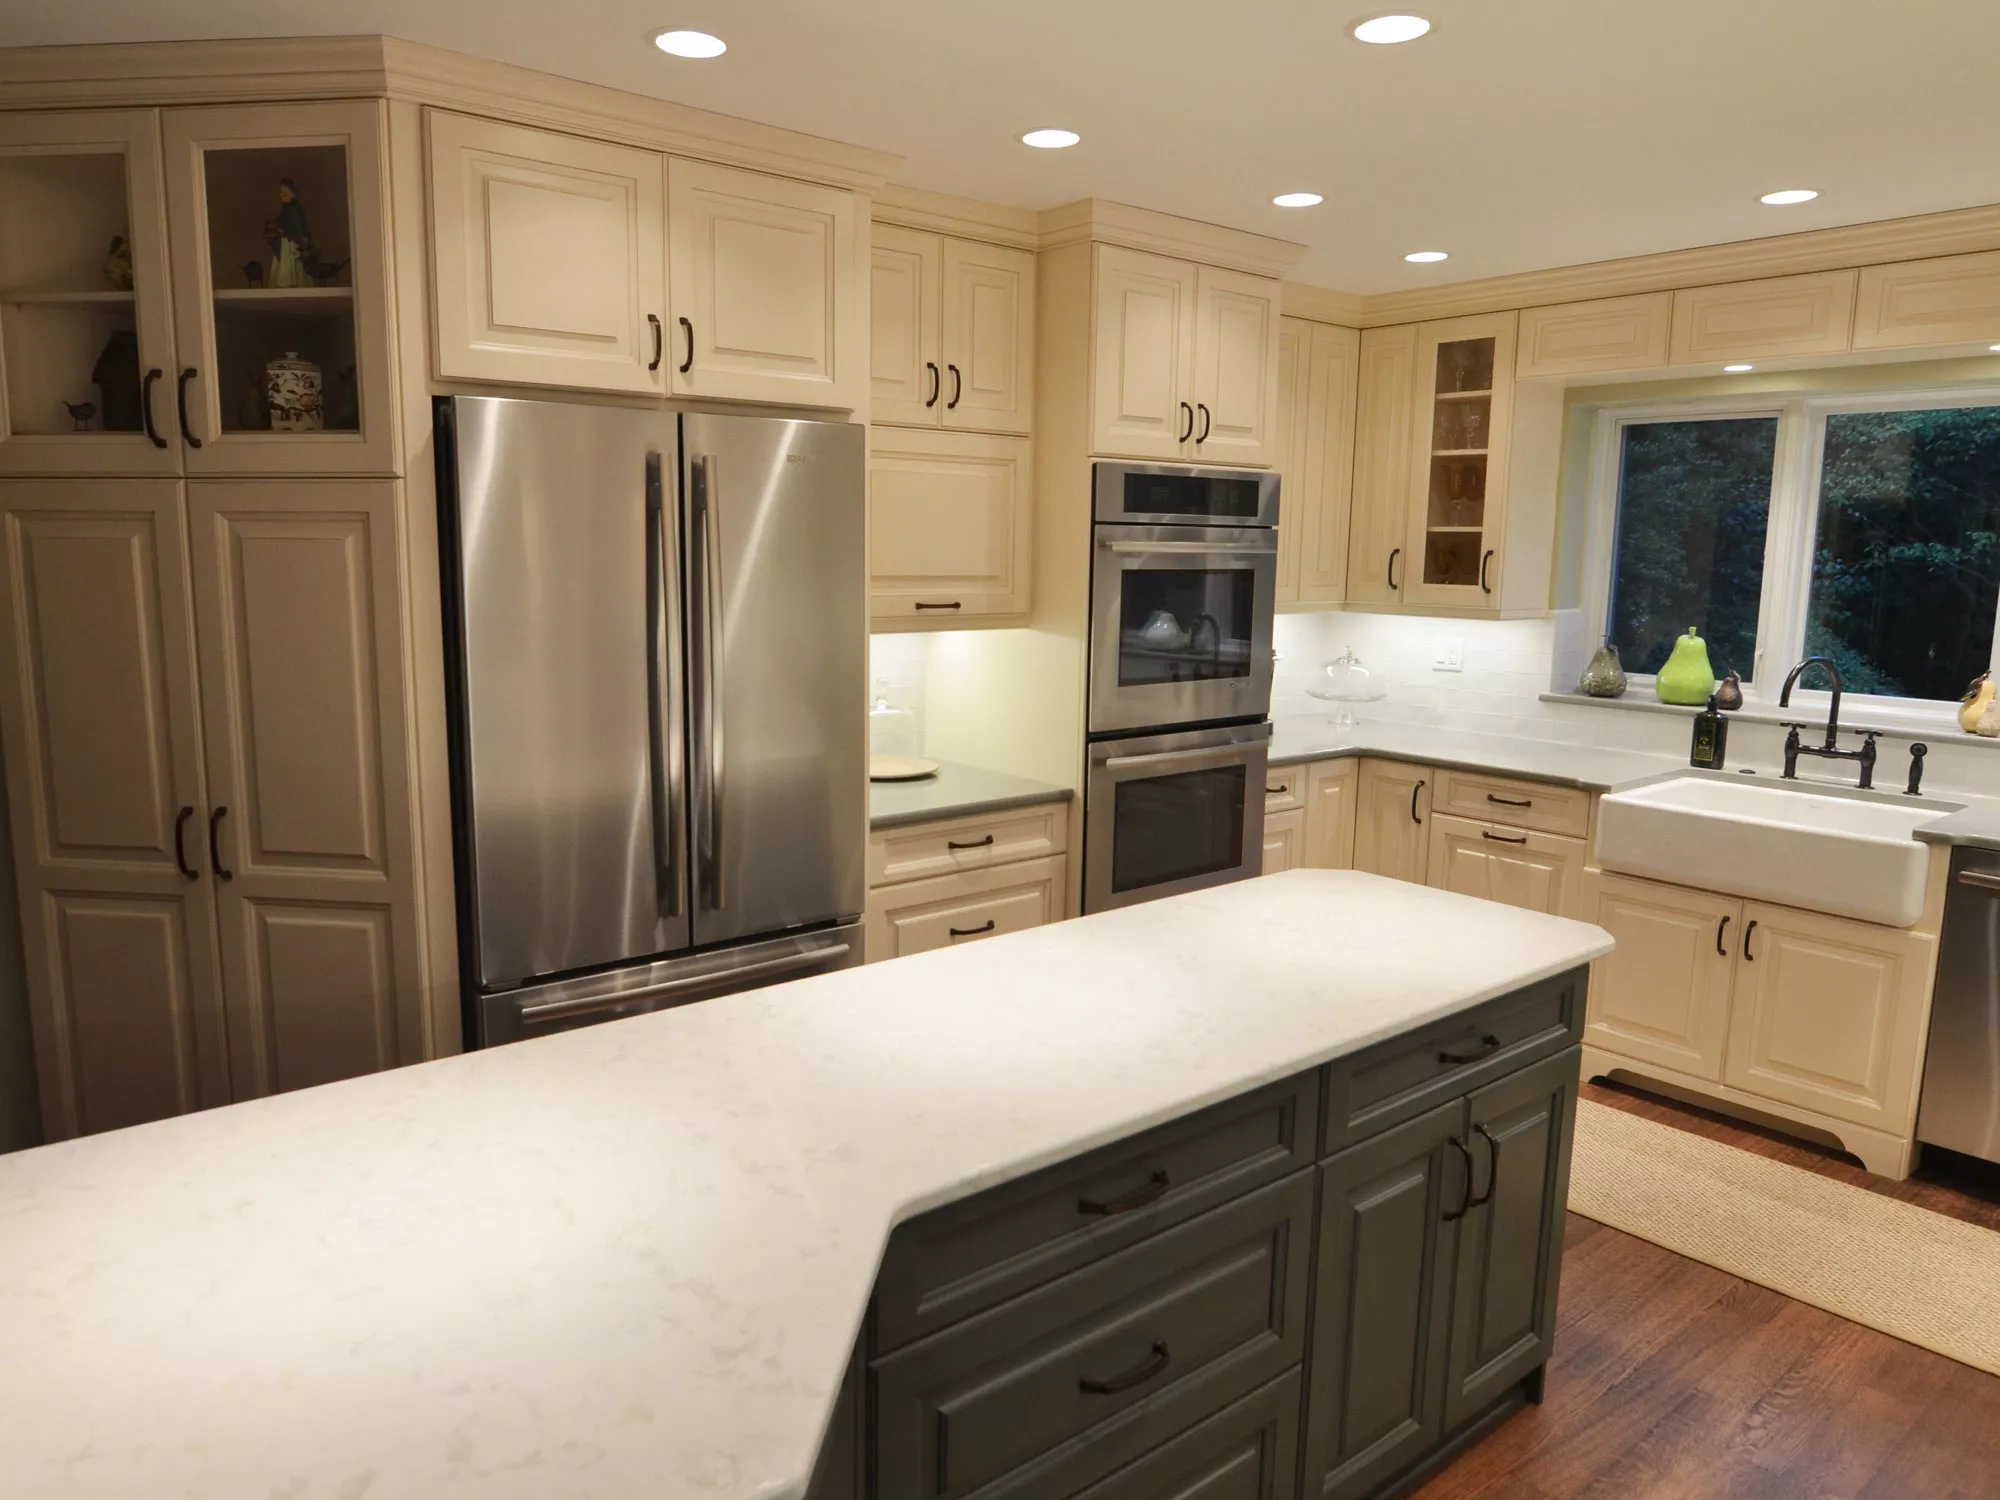 Kitchen remodeling in Naperville, IL. Custom kitchen design with green island.